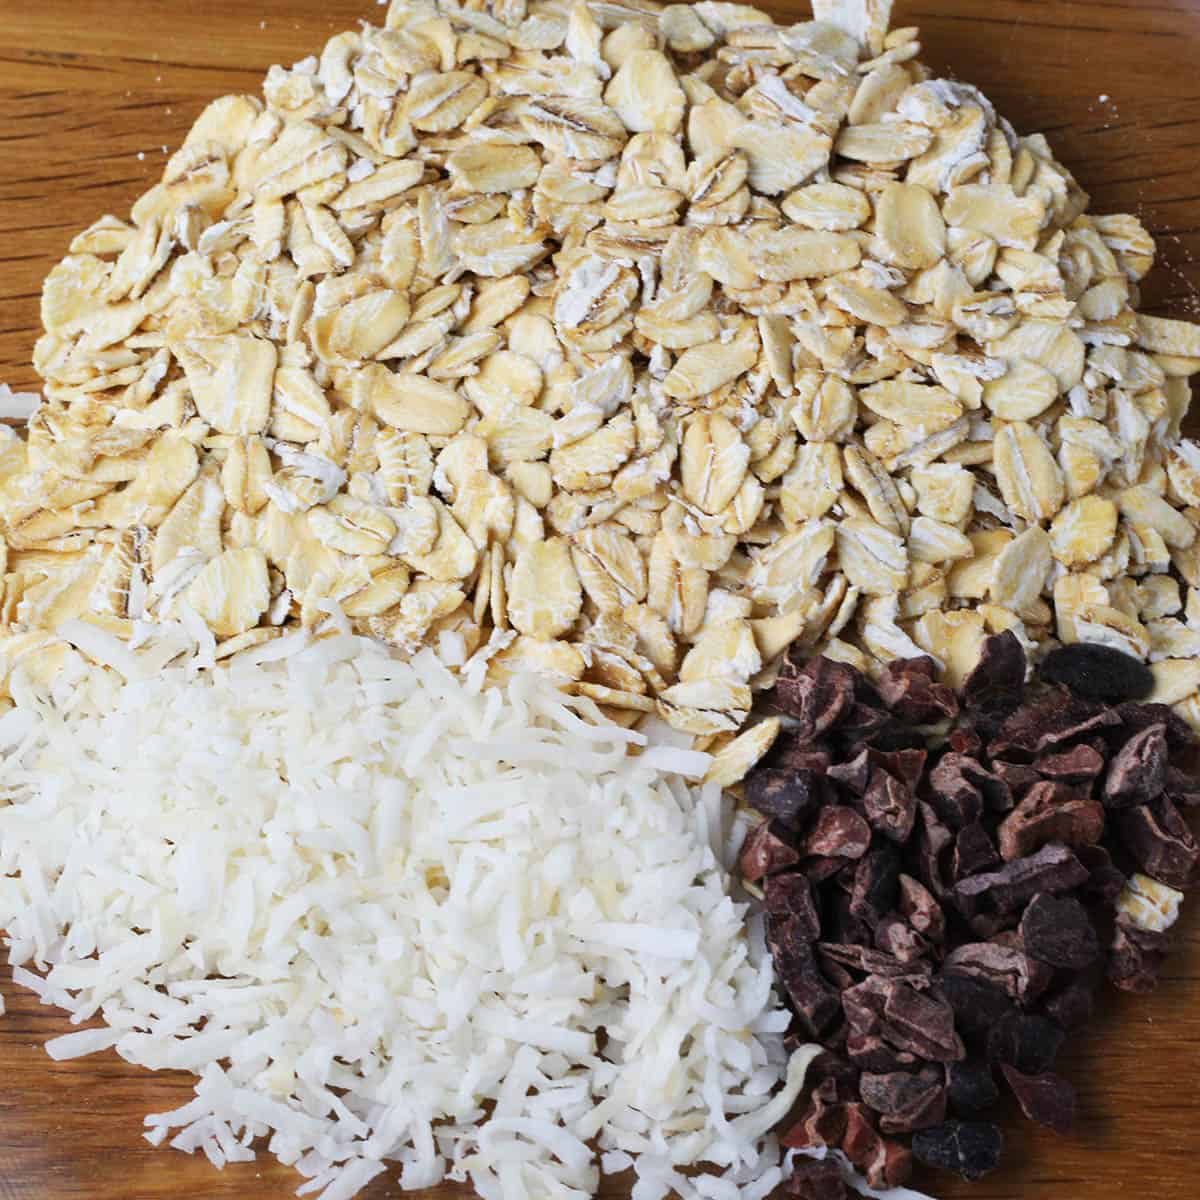 oats, shredded coconut, and cacao nibs on a wooden background and formed to shape a partitioned circle